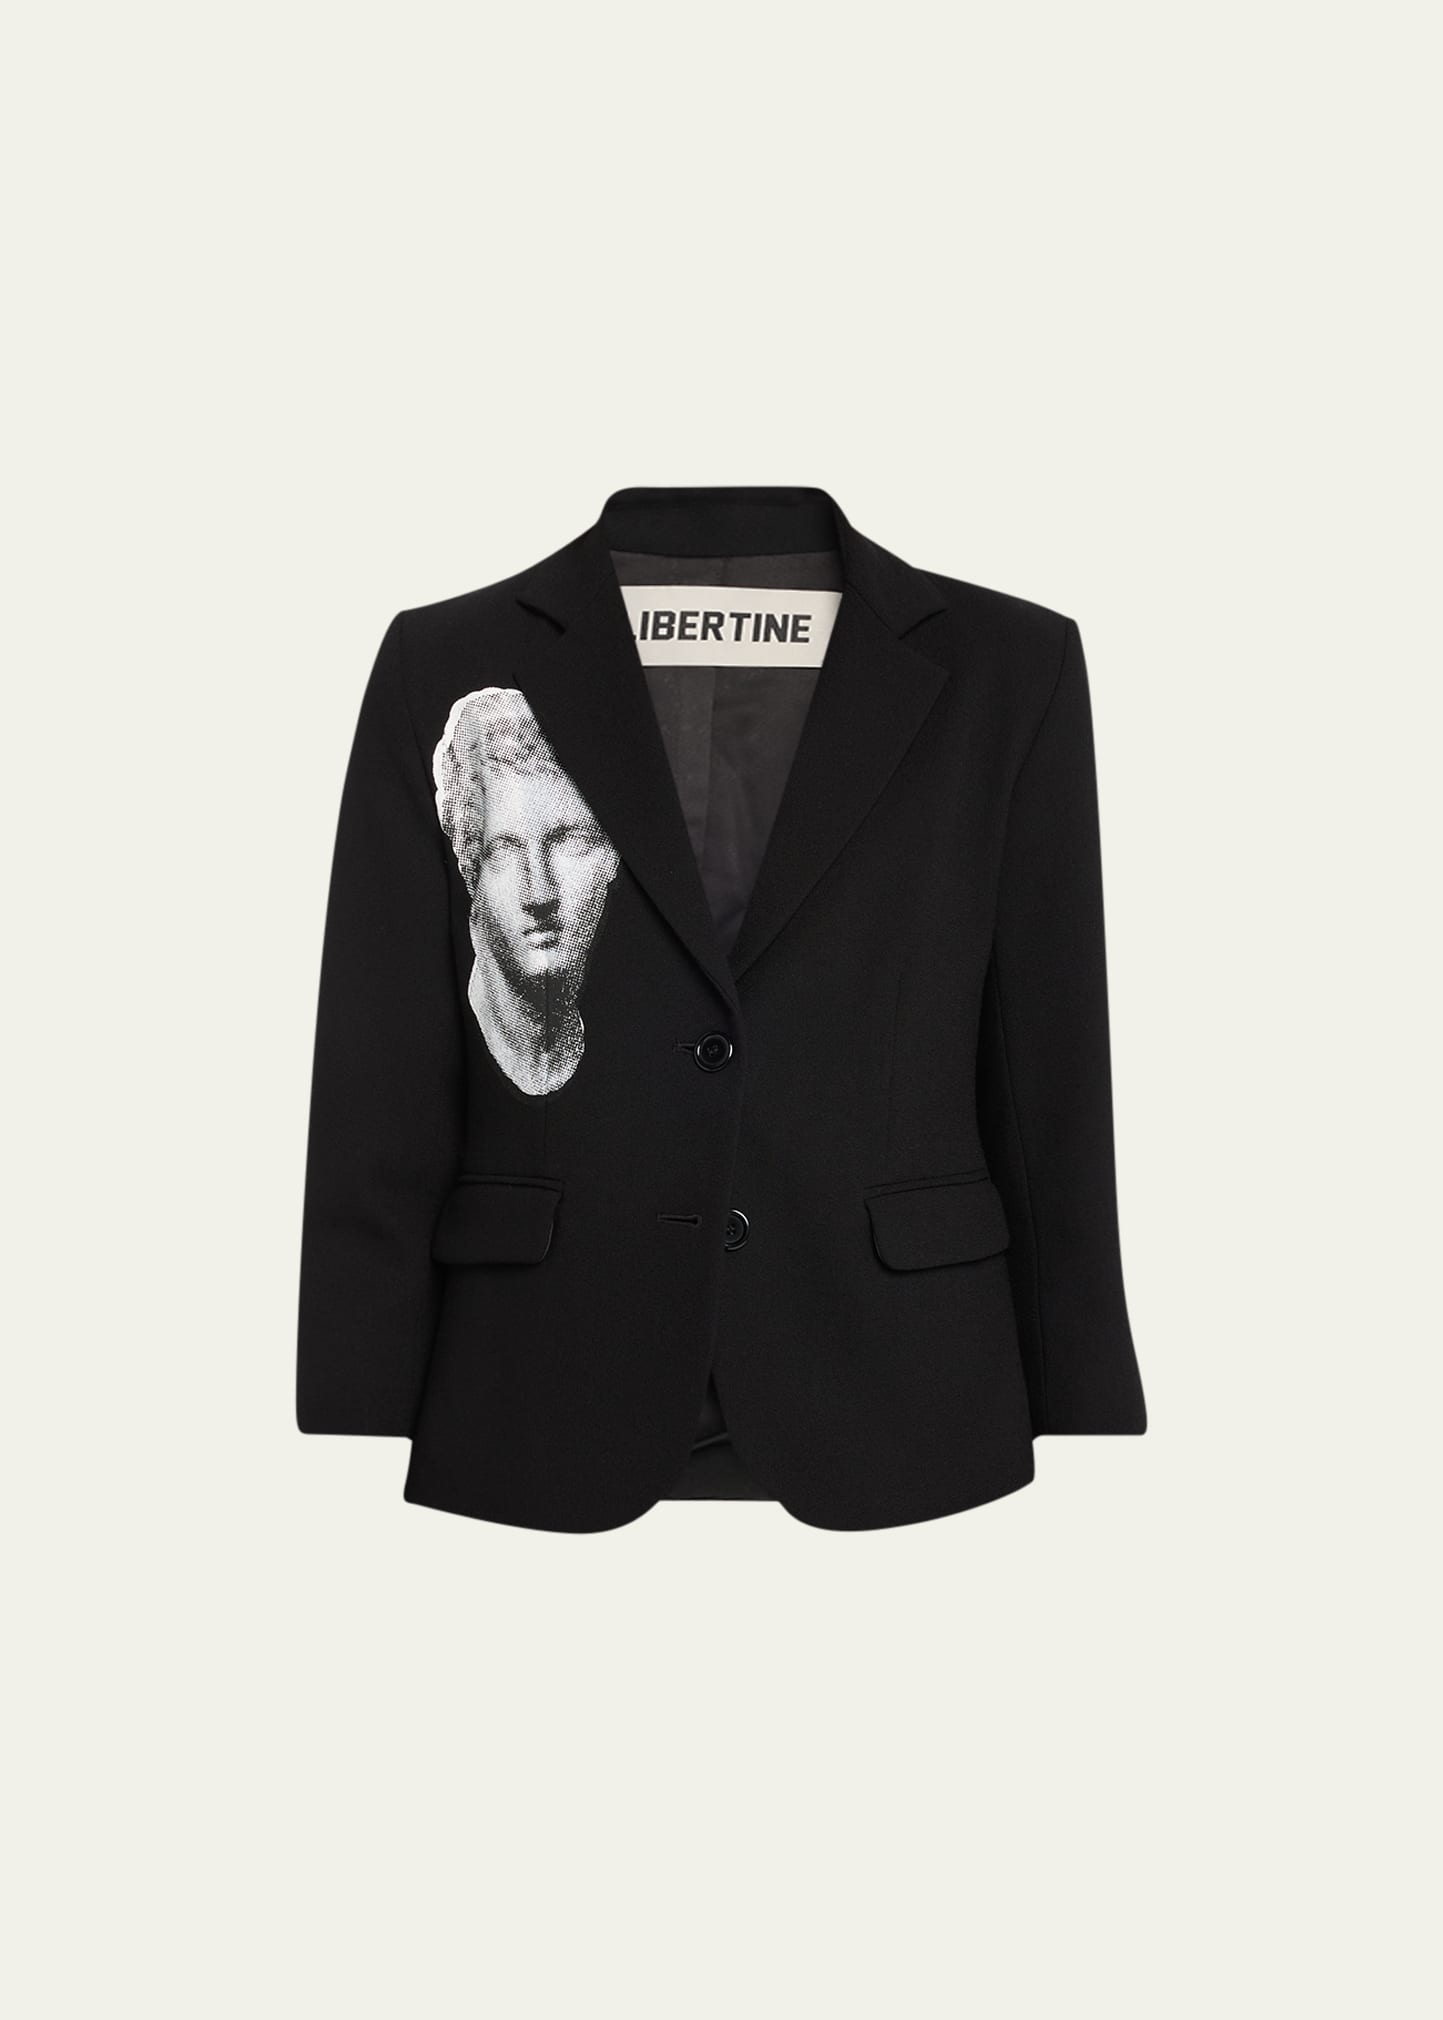 Libertine Cupid And Psyche Blazer Jacket With Printed Detail In Black